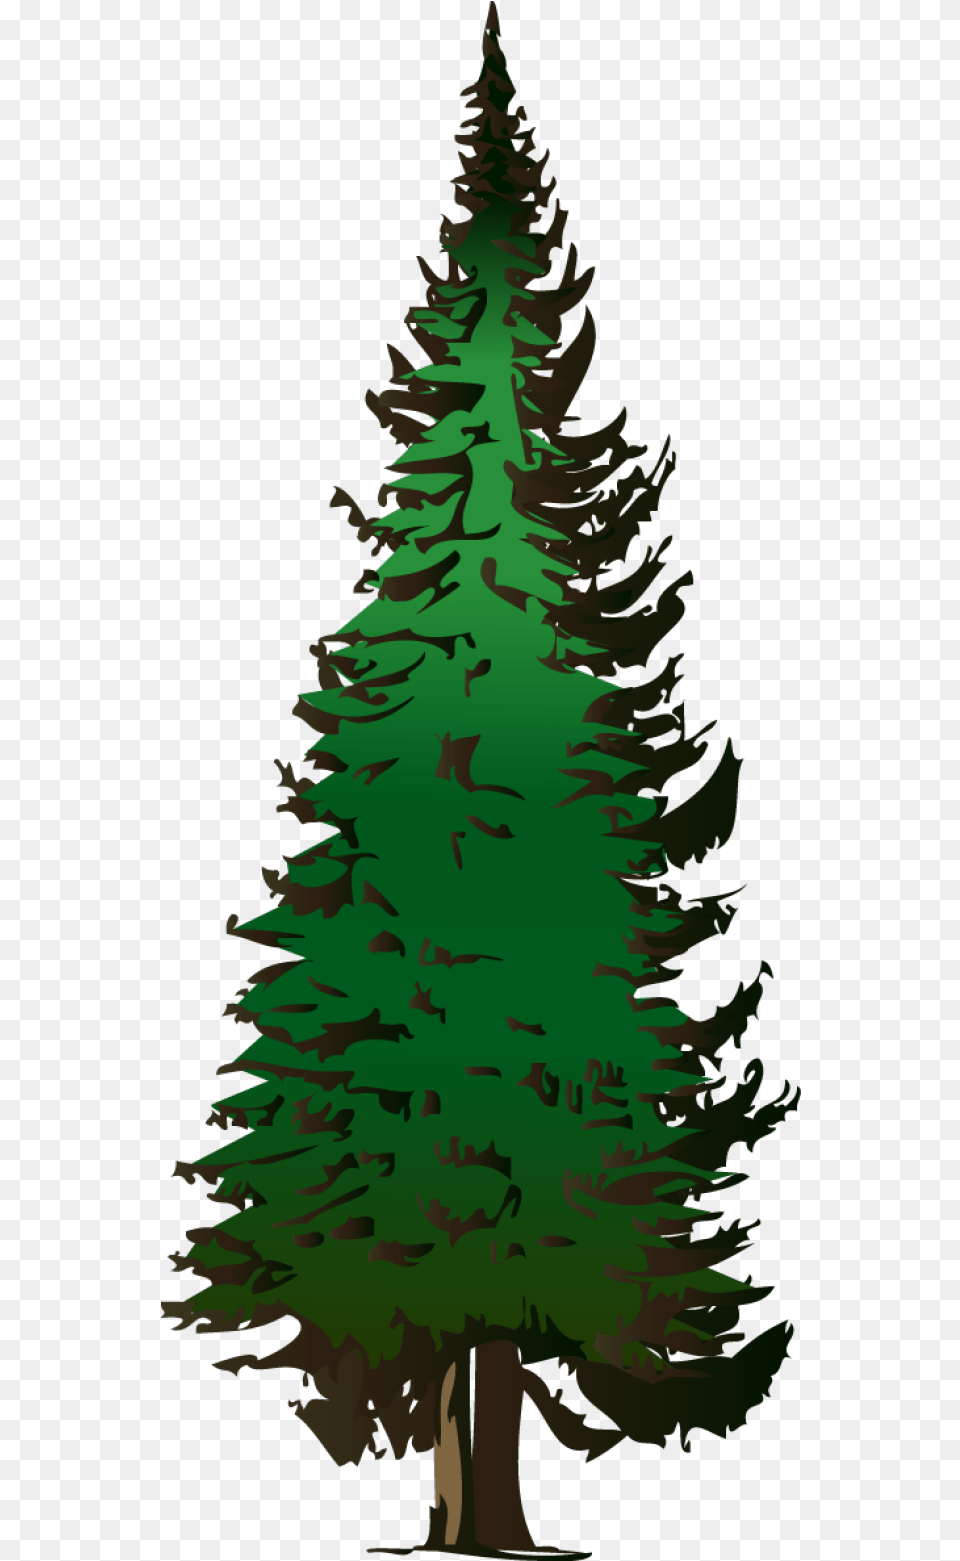 Pine Tree Logo Vector Stock Files Vector Pine Tree, Plant, Fir, Person, Green Png